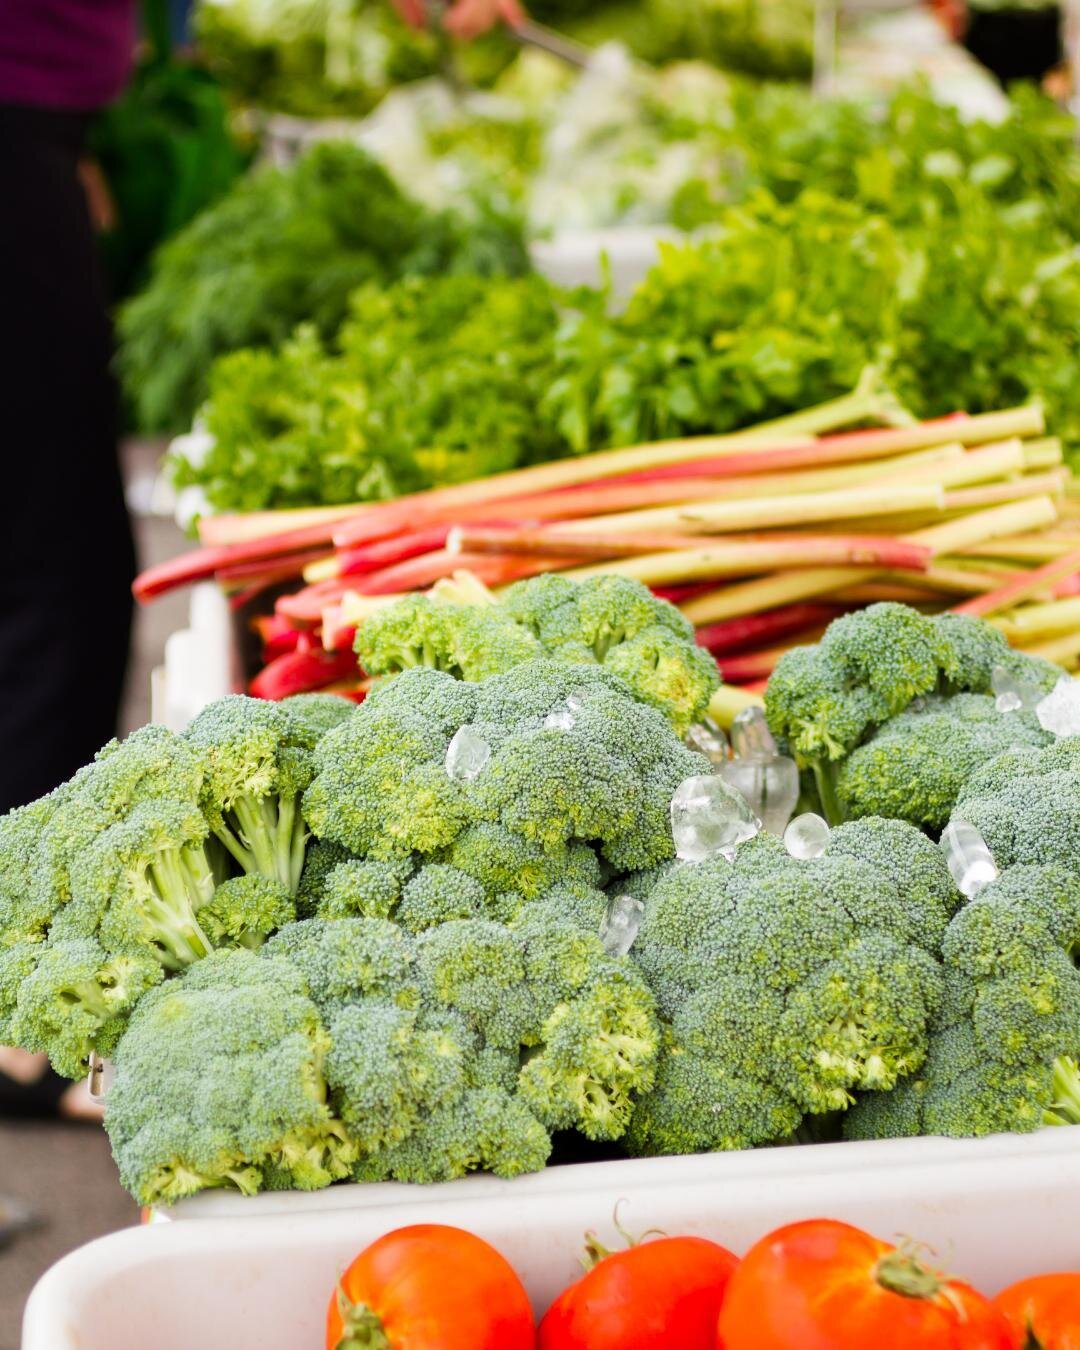 Get the best veggies to make the most tasty dinners 🥦 Find the freshest veggies locally at Fresh and Easy

#wiltonplaza #freshandeasy #wiltonfreshfood #wiltonplazashoppingmall #freshveggies #freshveggie #freshfoodmarket #freshfoodmarkets #freshfoodm